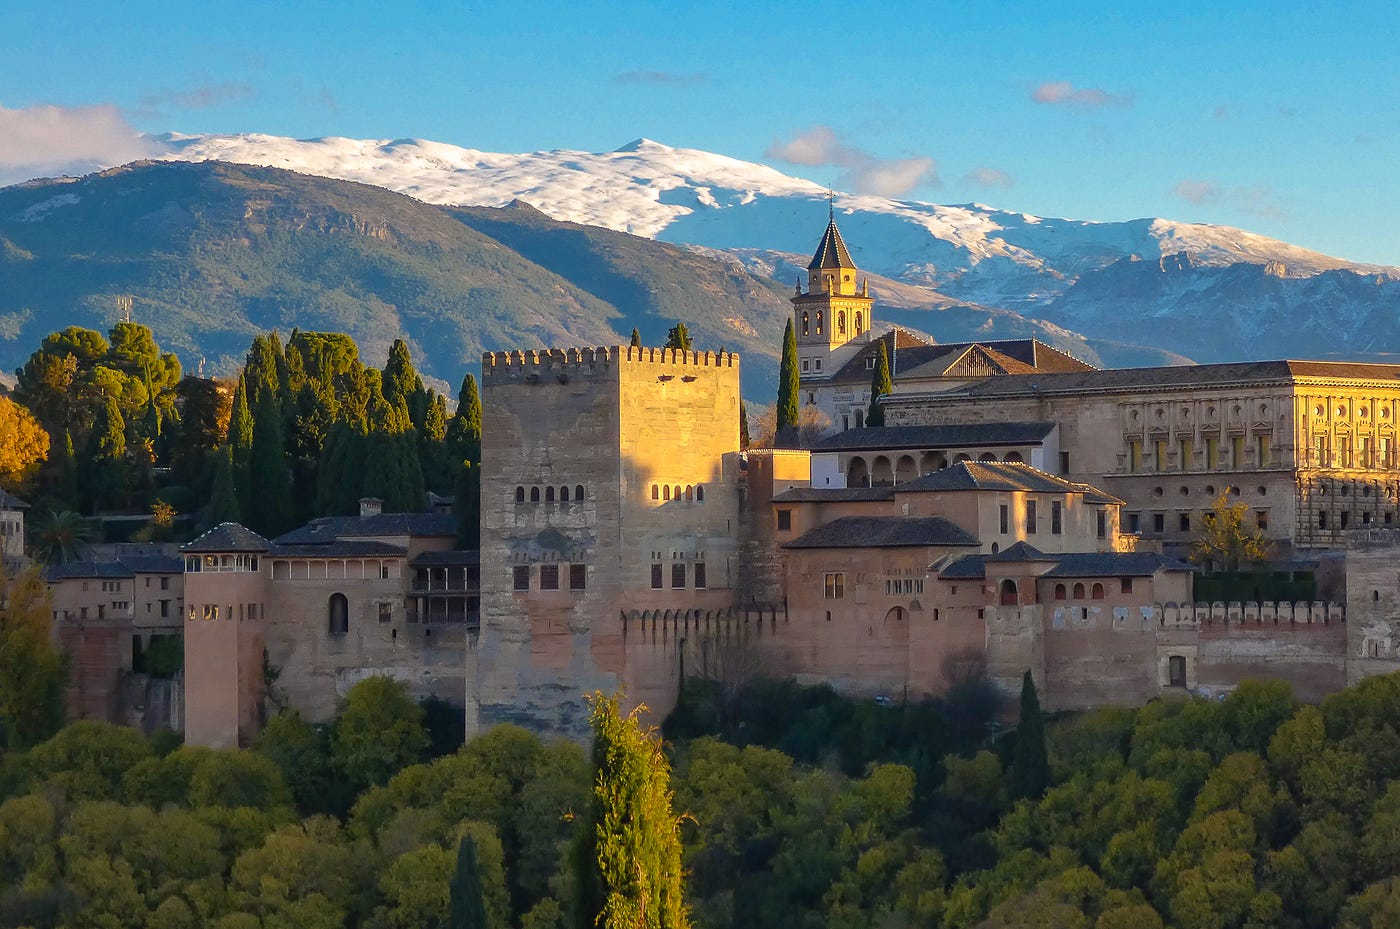 Fun Facts About the Alhambra Granada/Spain & How To Visit Alhambra!